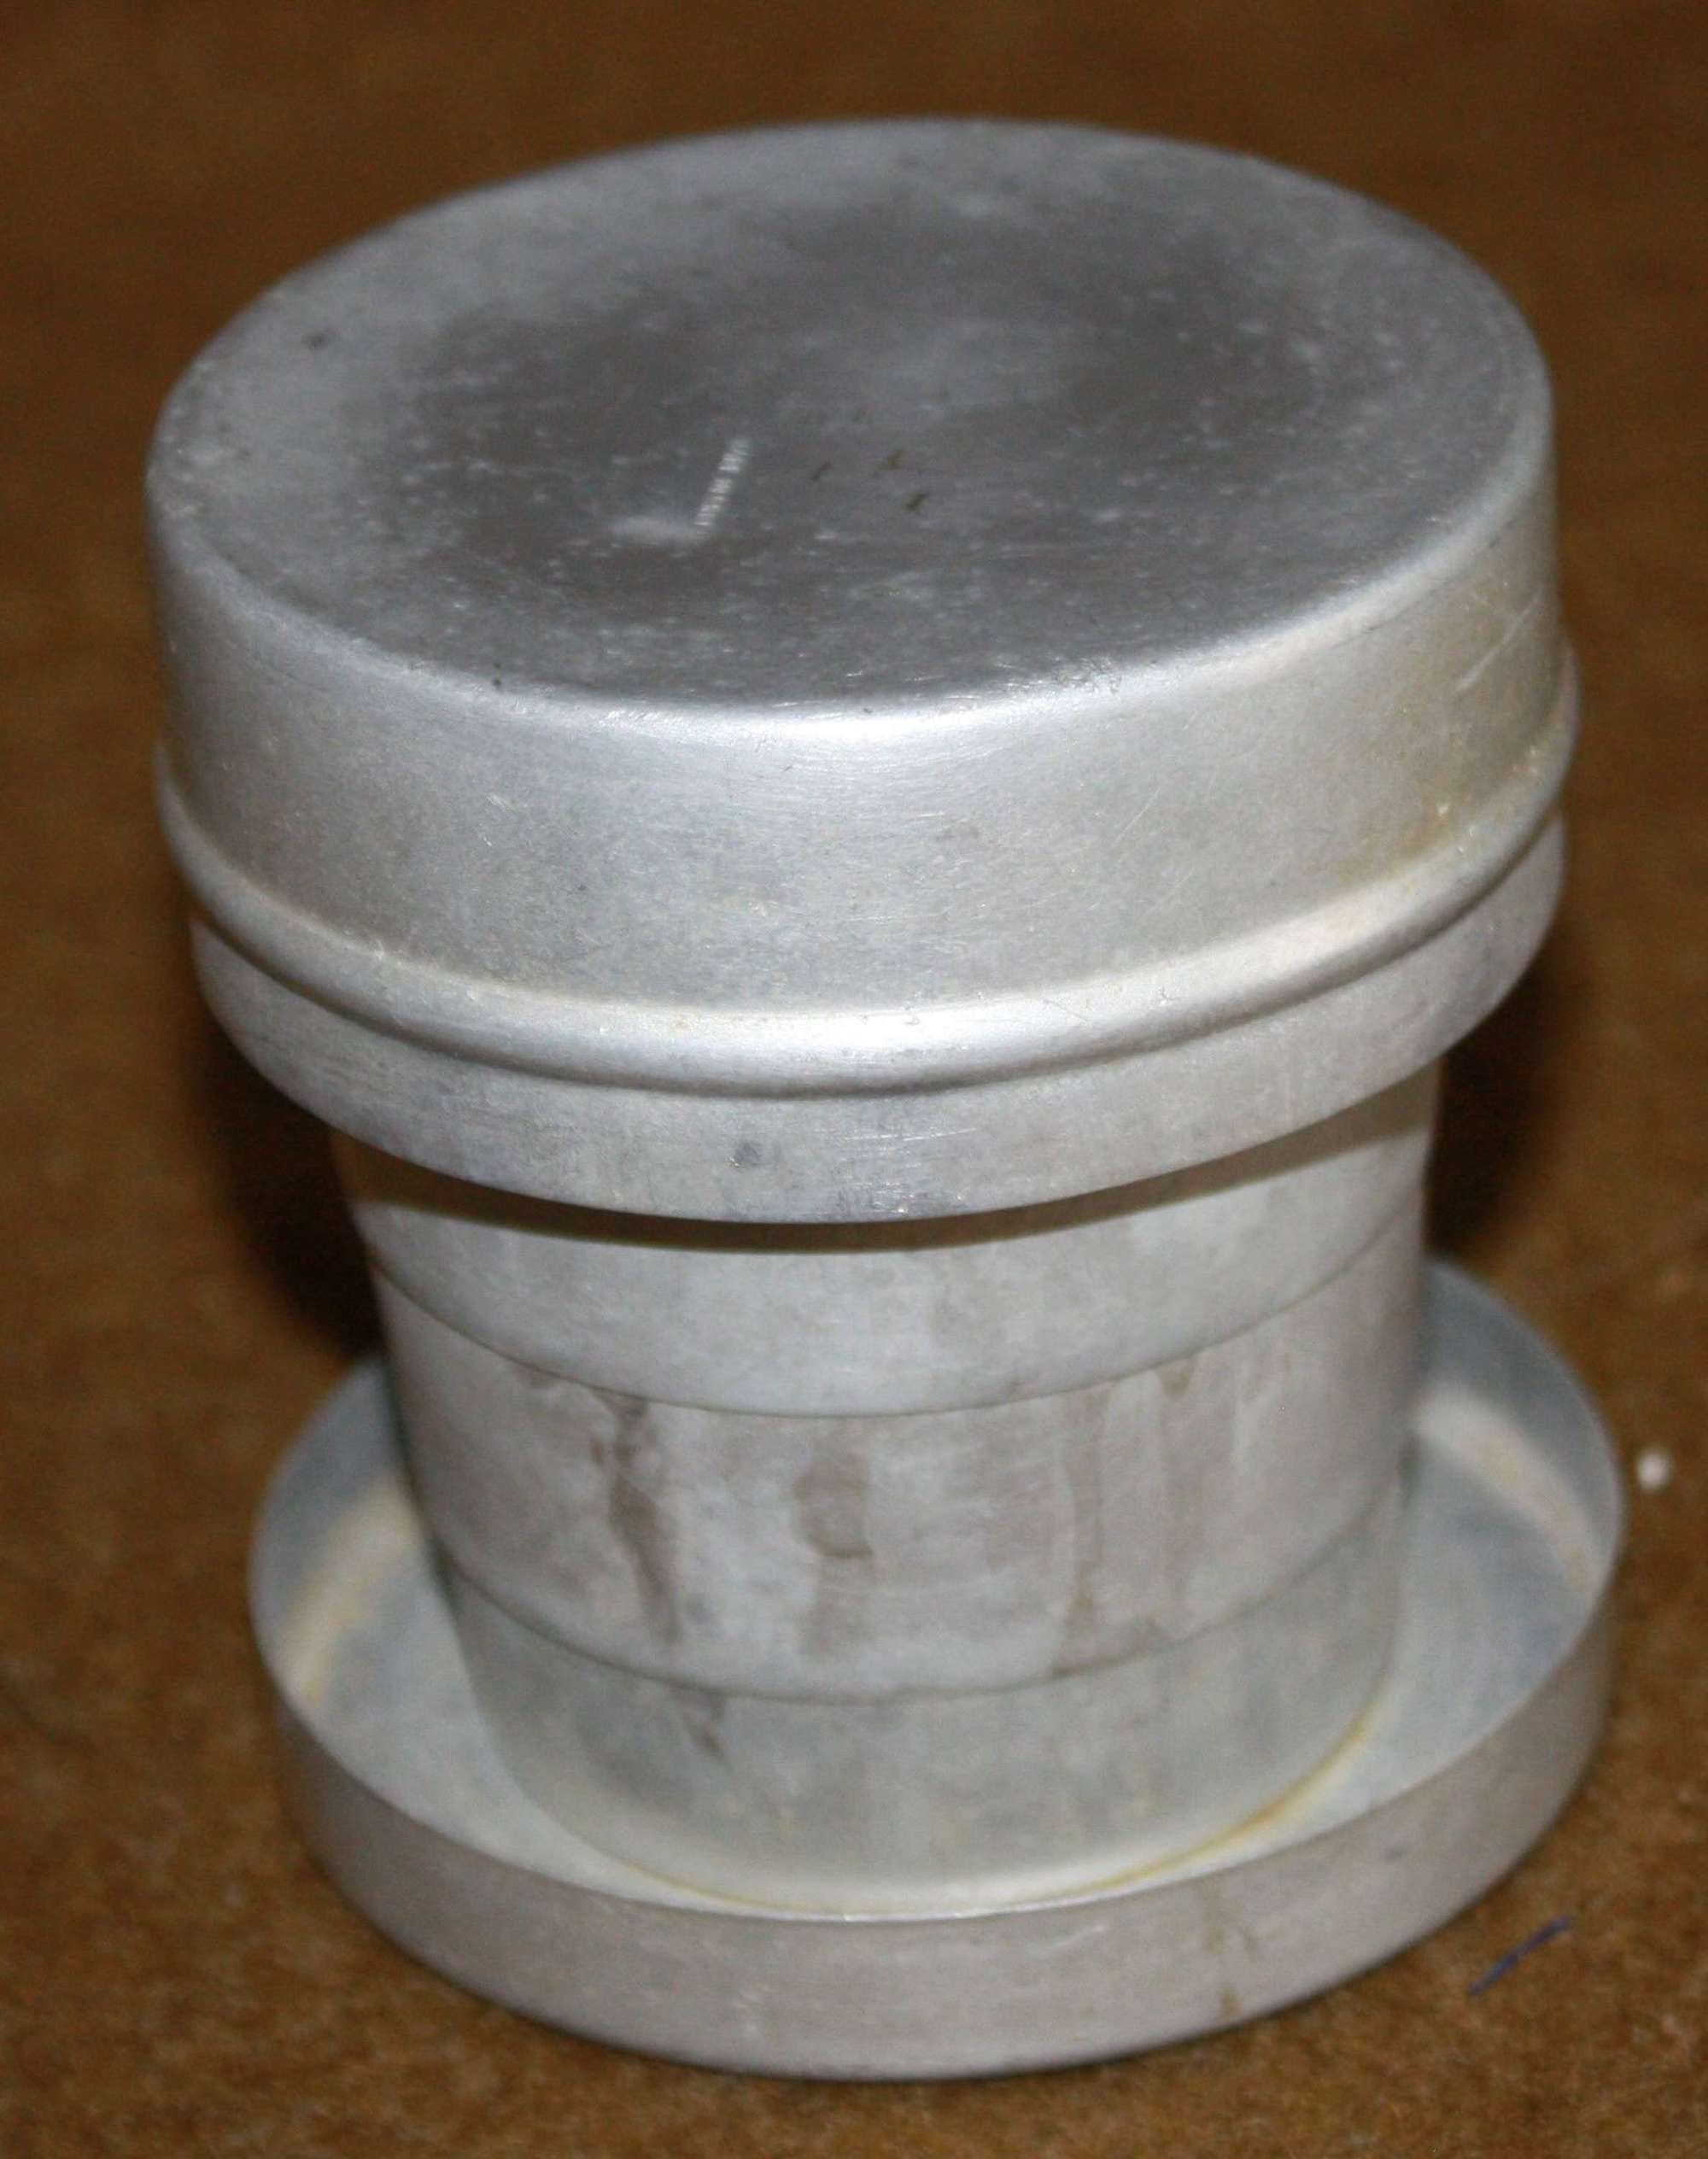 A GOOD ALLOY EXPANDING PRIVATE PURCHASE CUP